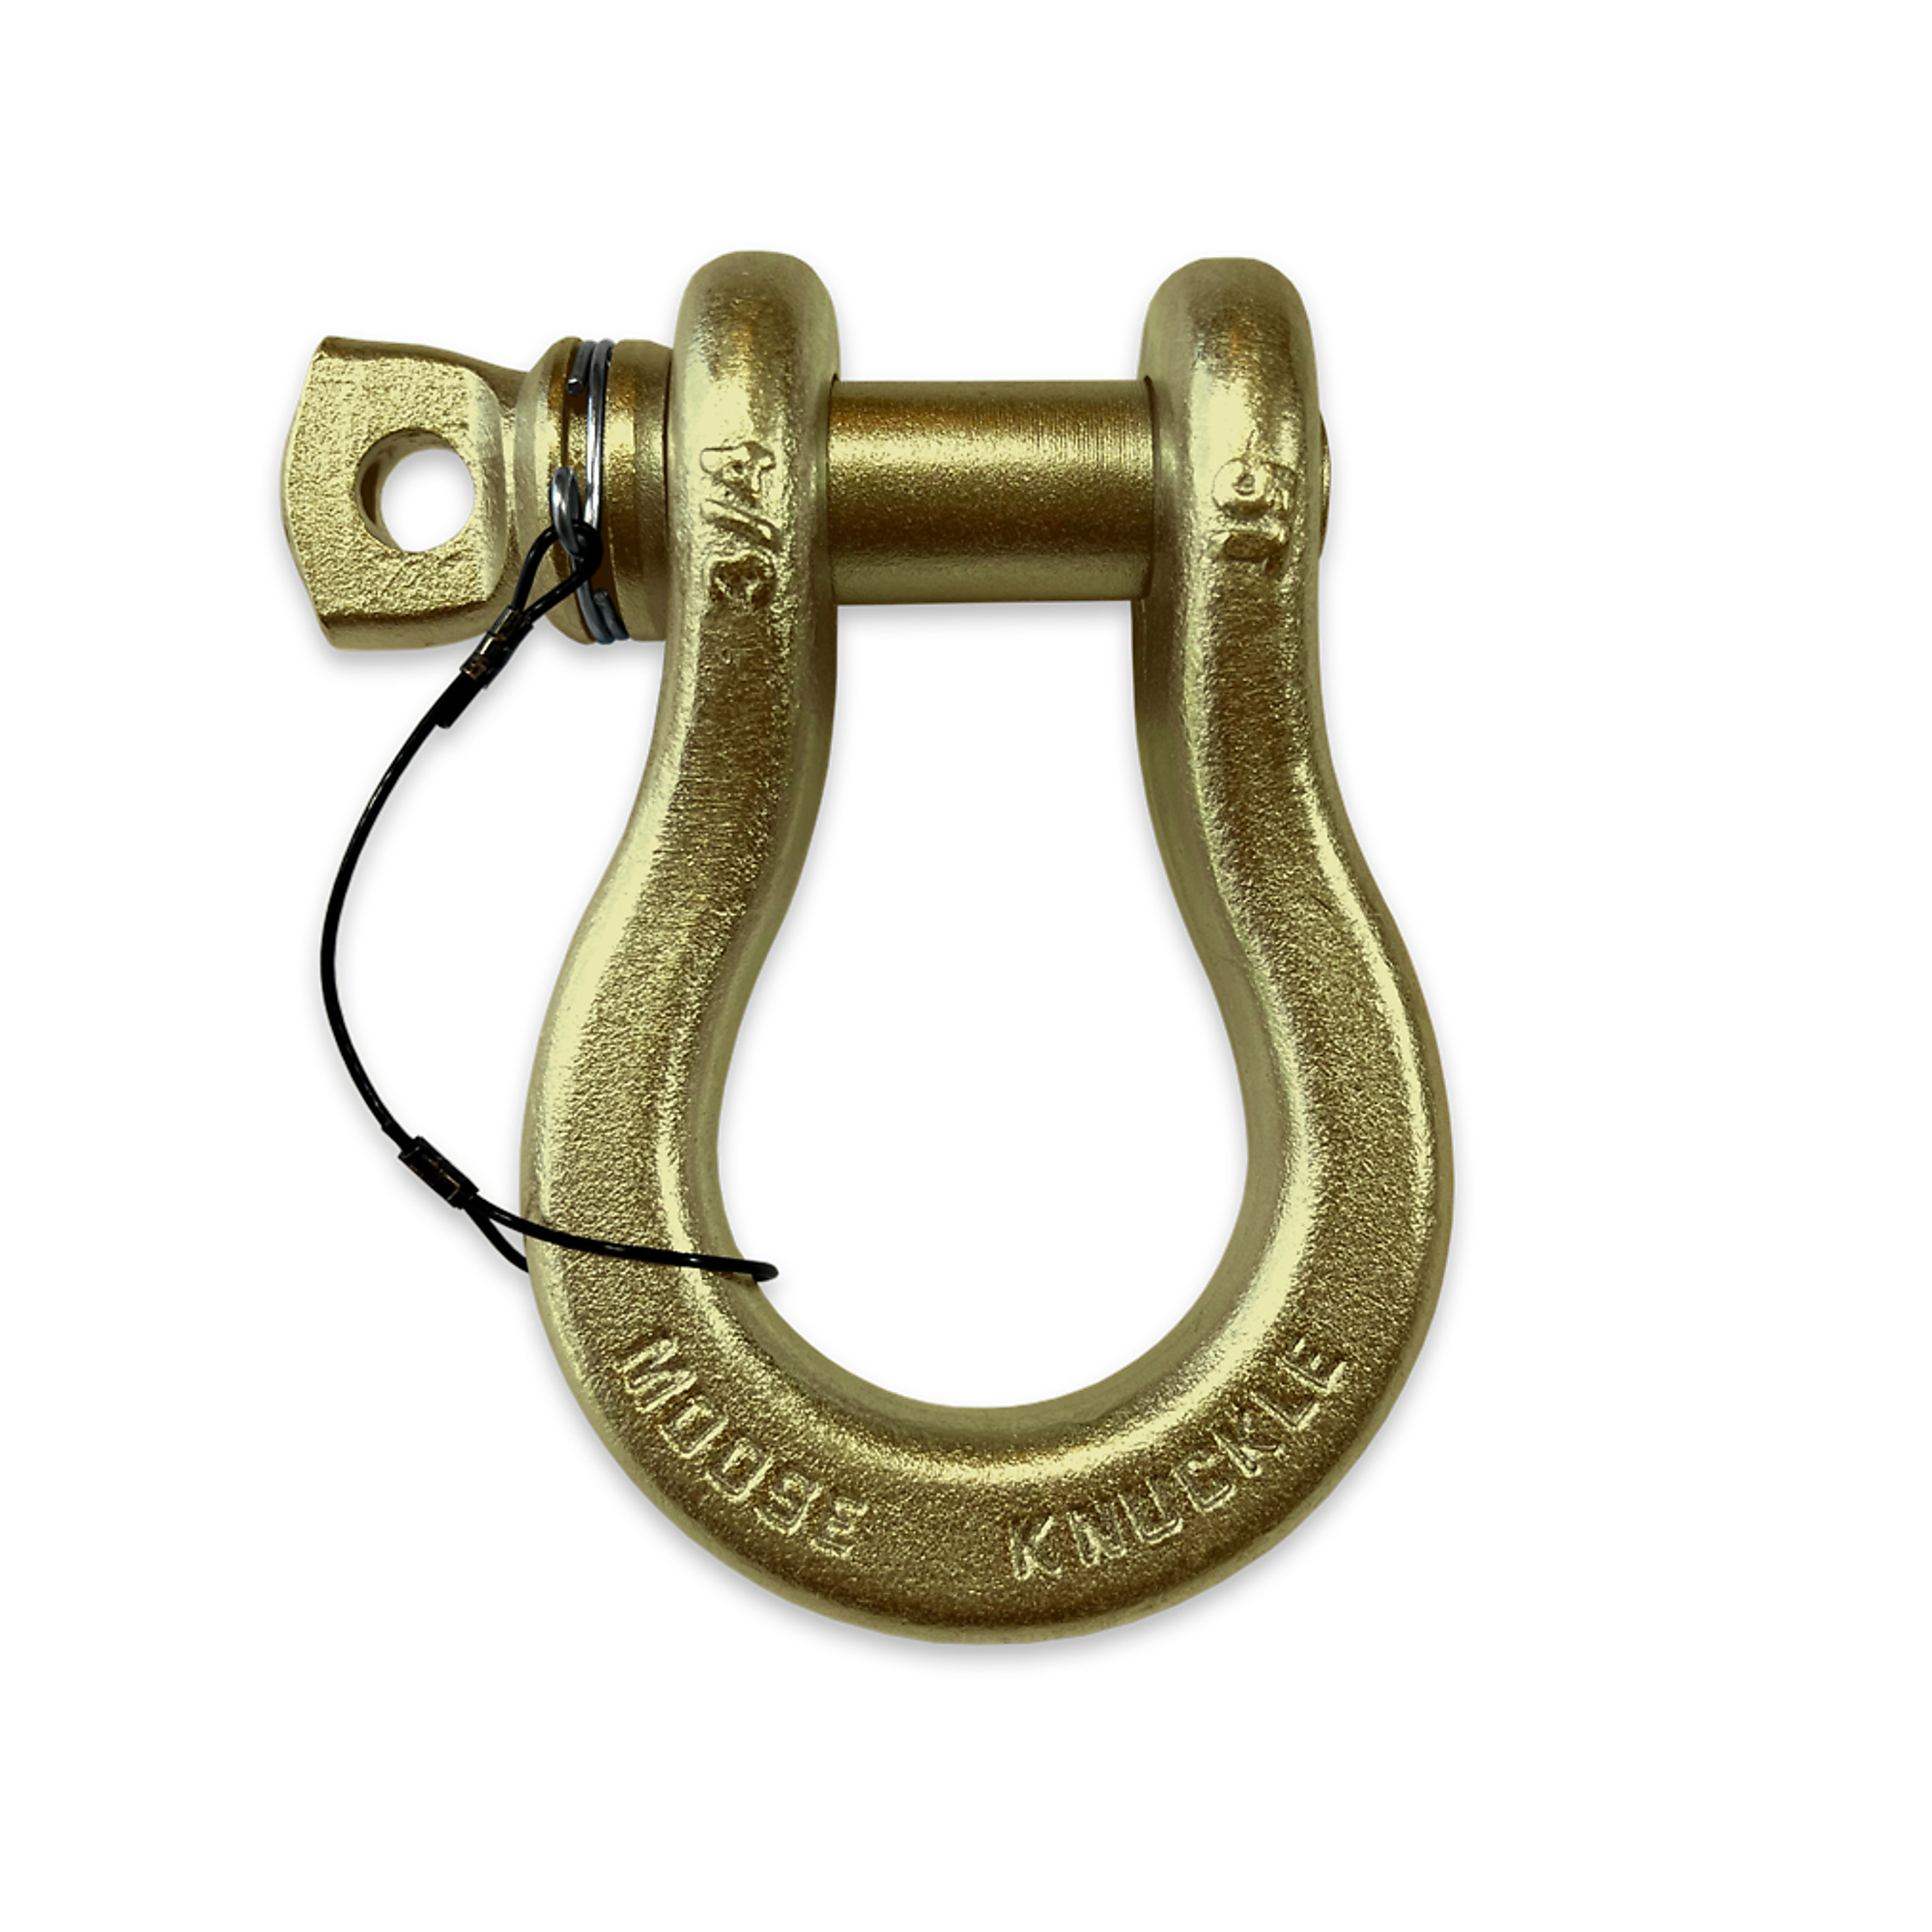 Moose Knuckle Offroad, Brass Knuckle Recovery Tow Lanyard Spin Pin 3/4 Shackle, Working Load Limit 10000 lb, Model FN000023-012